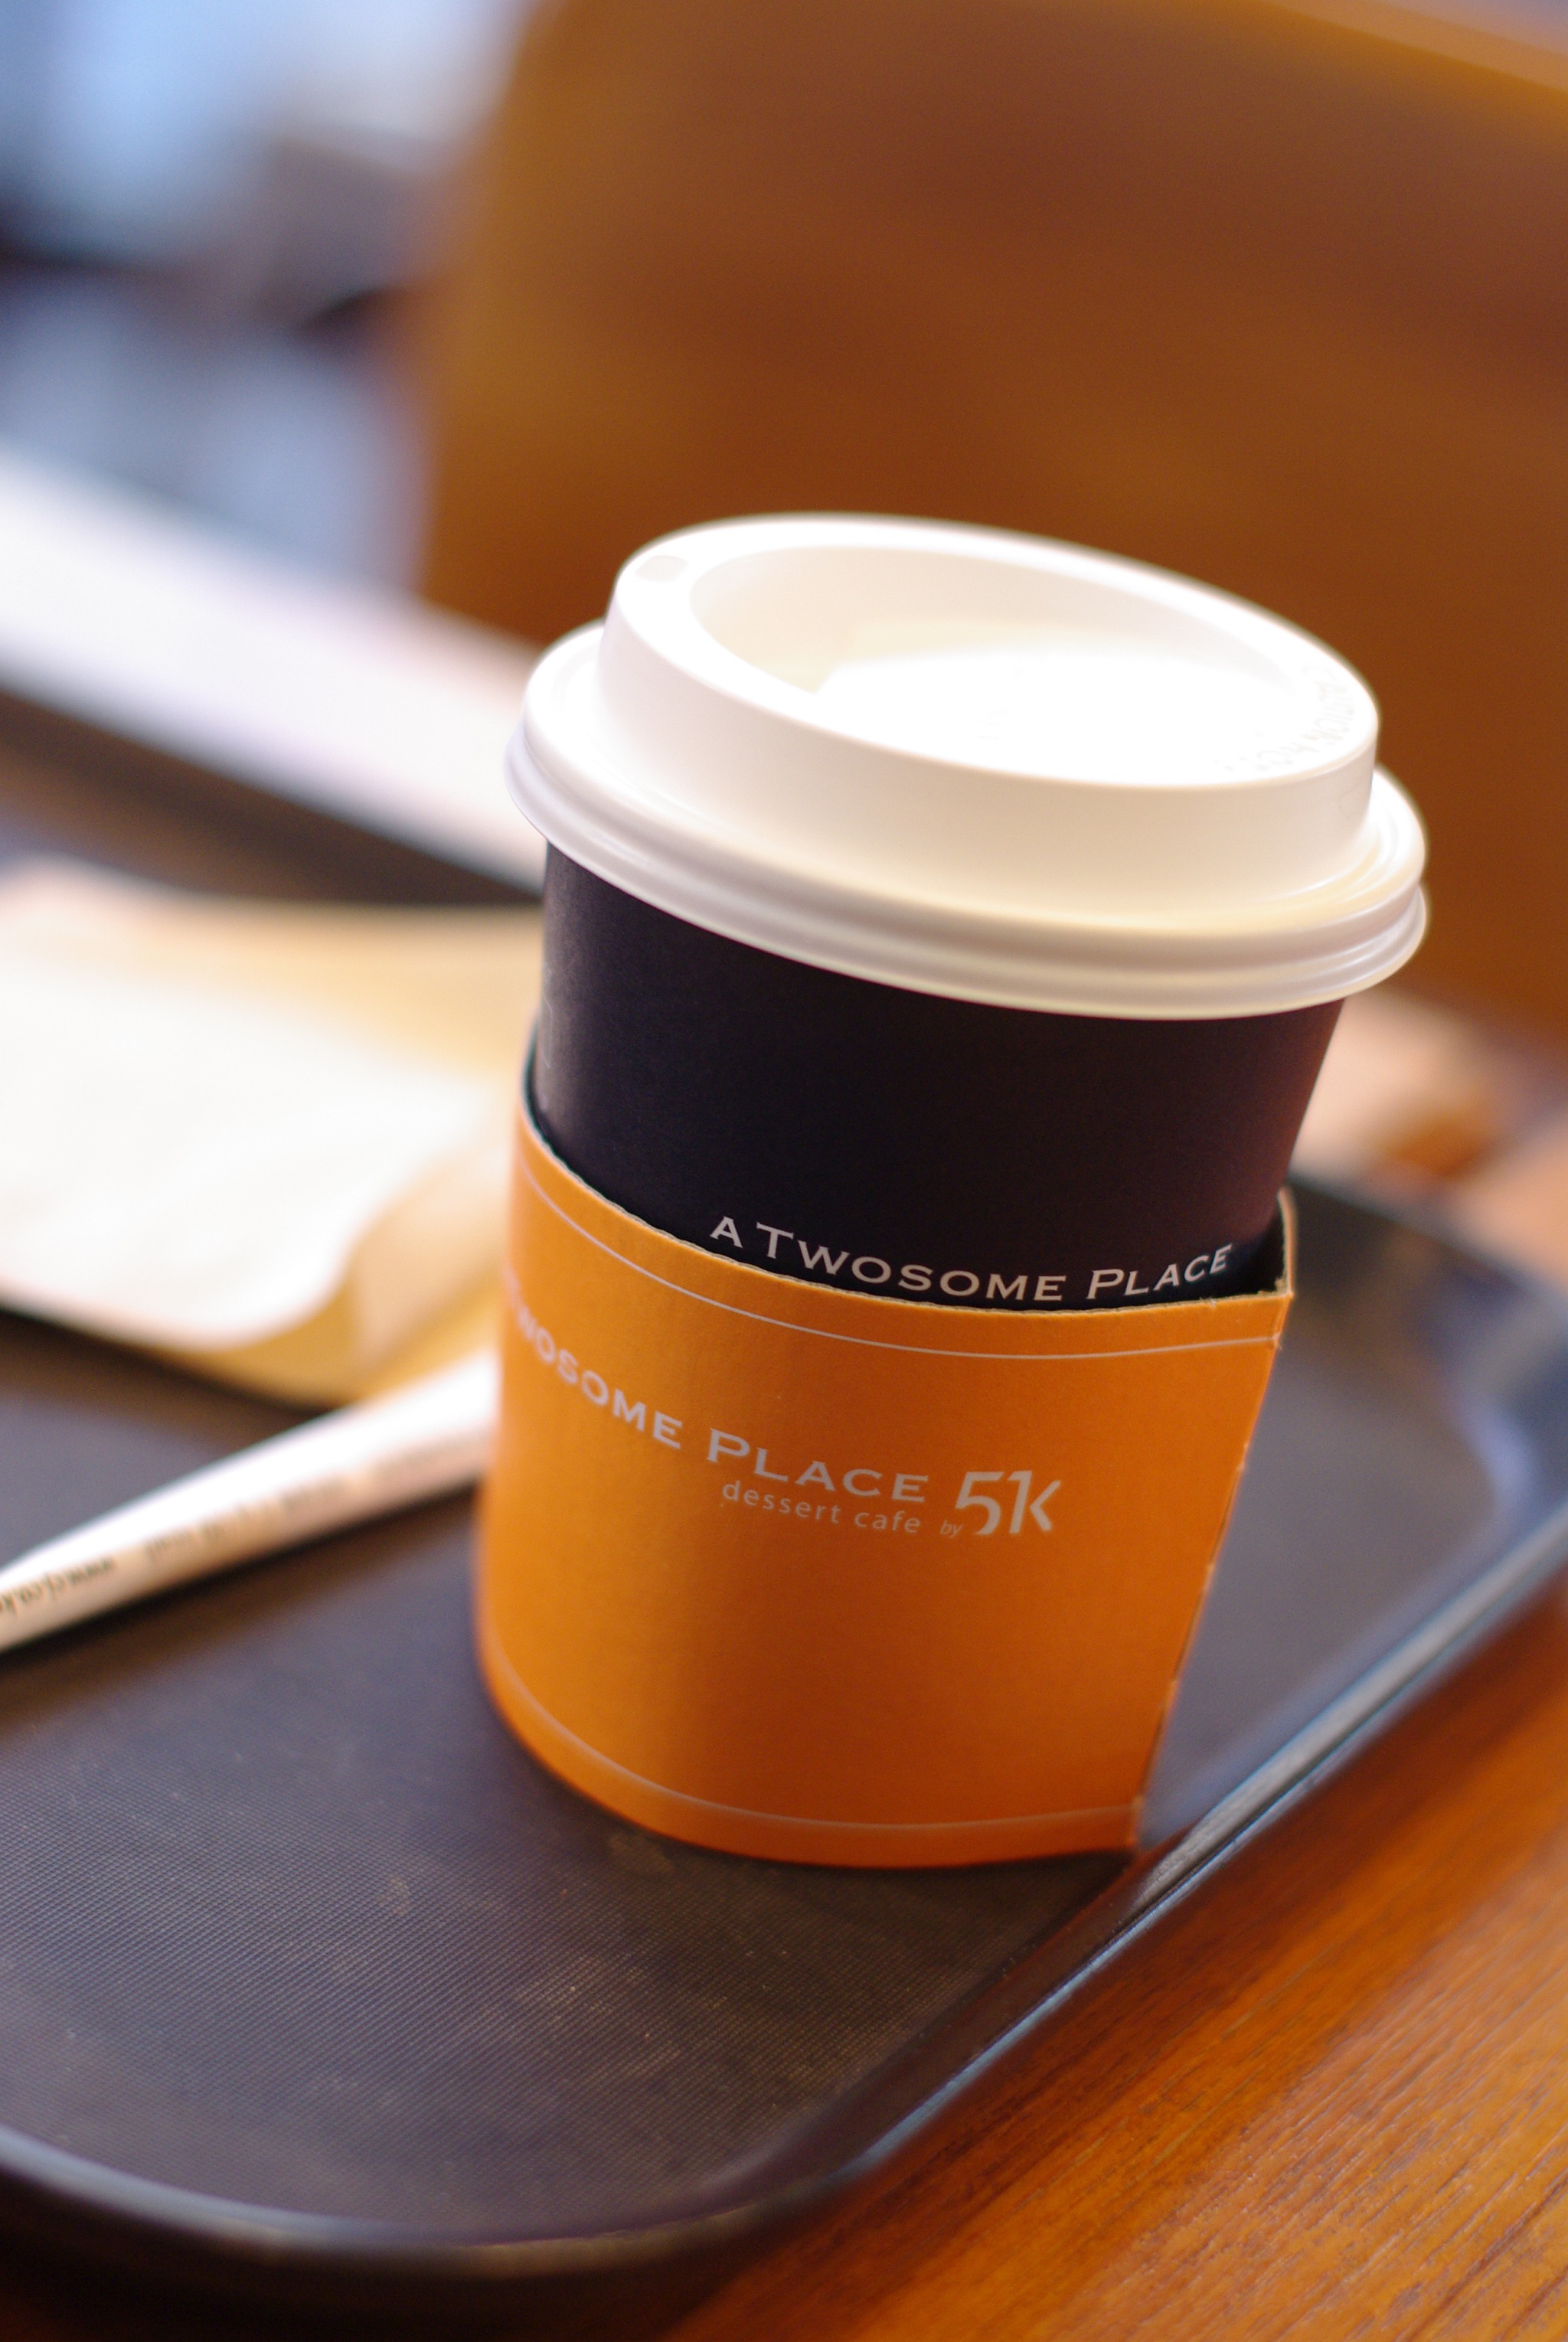 A Twosome Place By 51k(狎鷗亭店)